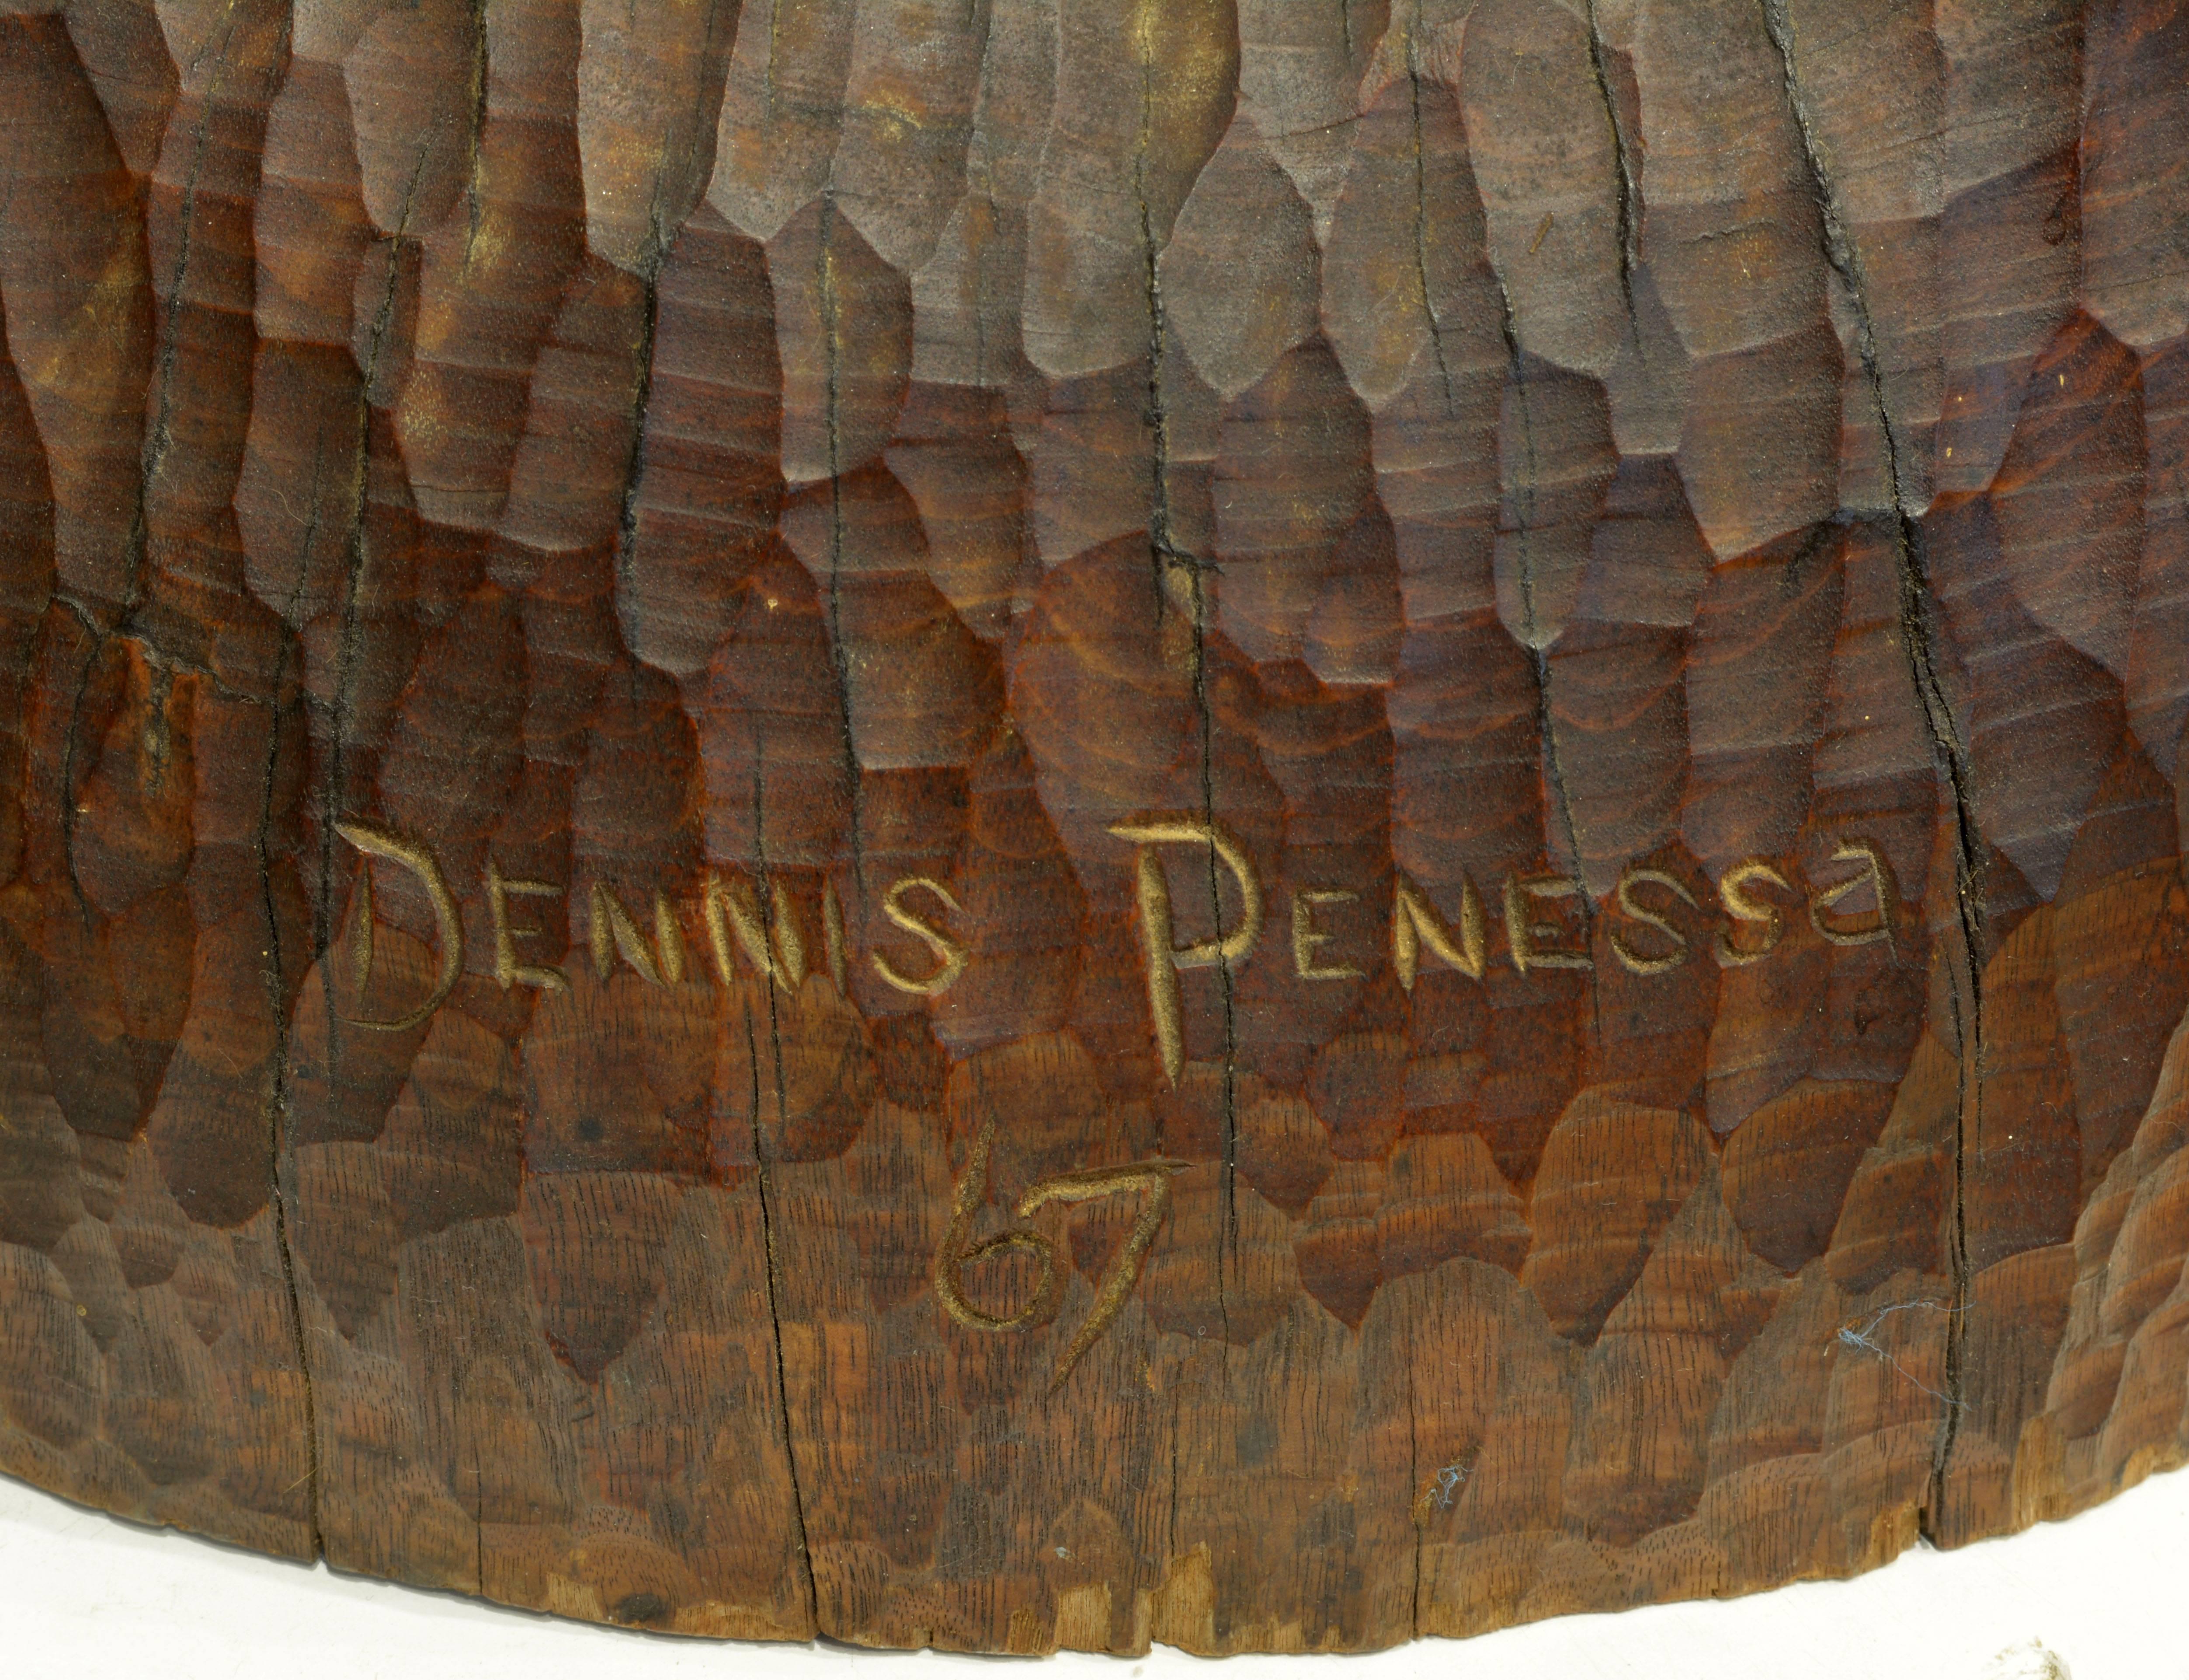 Expressive Lifesize Hardwood Statue of Male Nude by Dennis Penessa 2